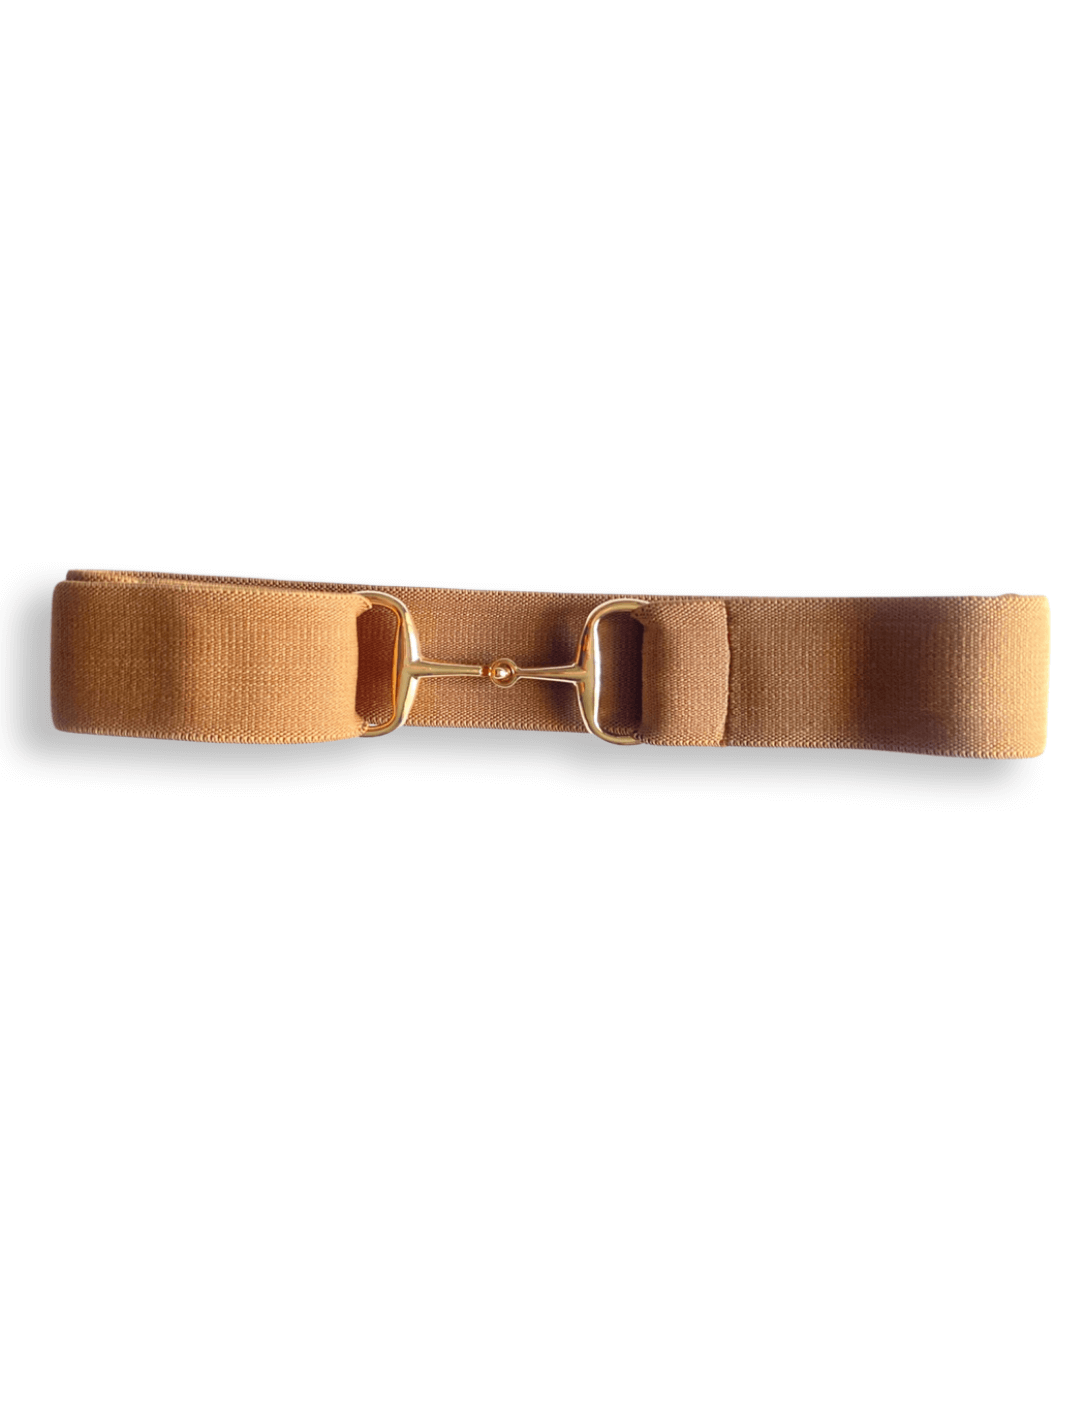 brown and gold belt